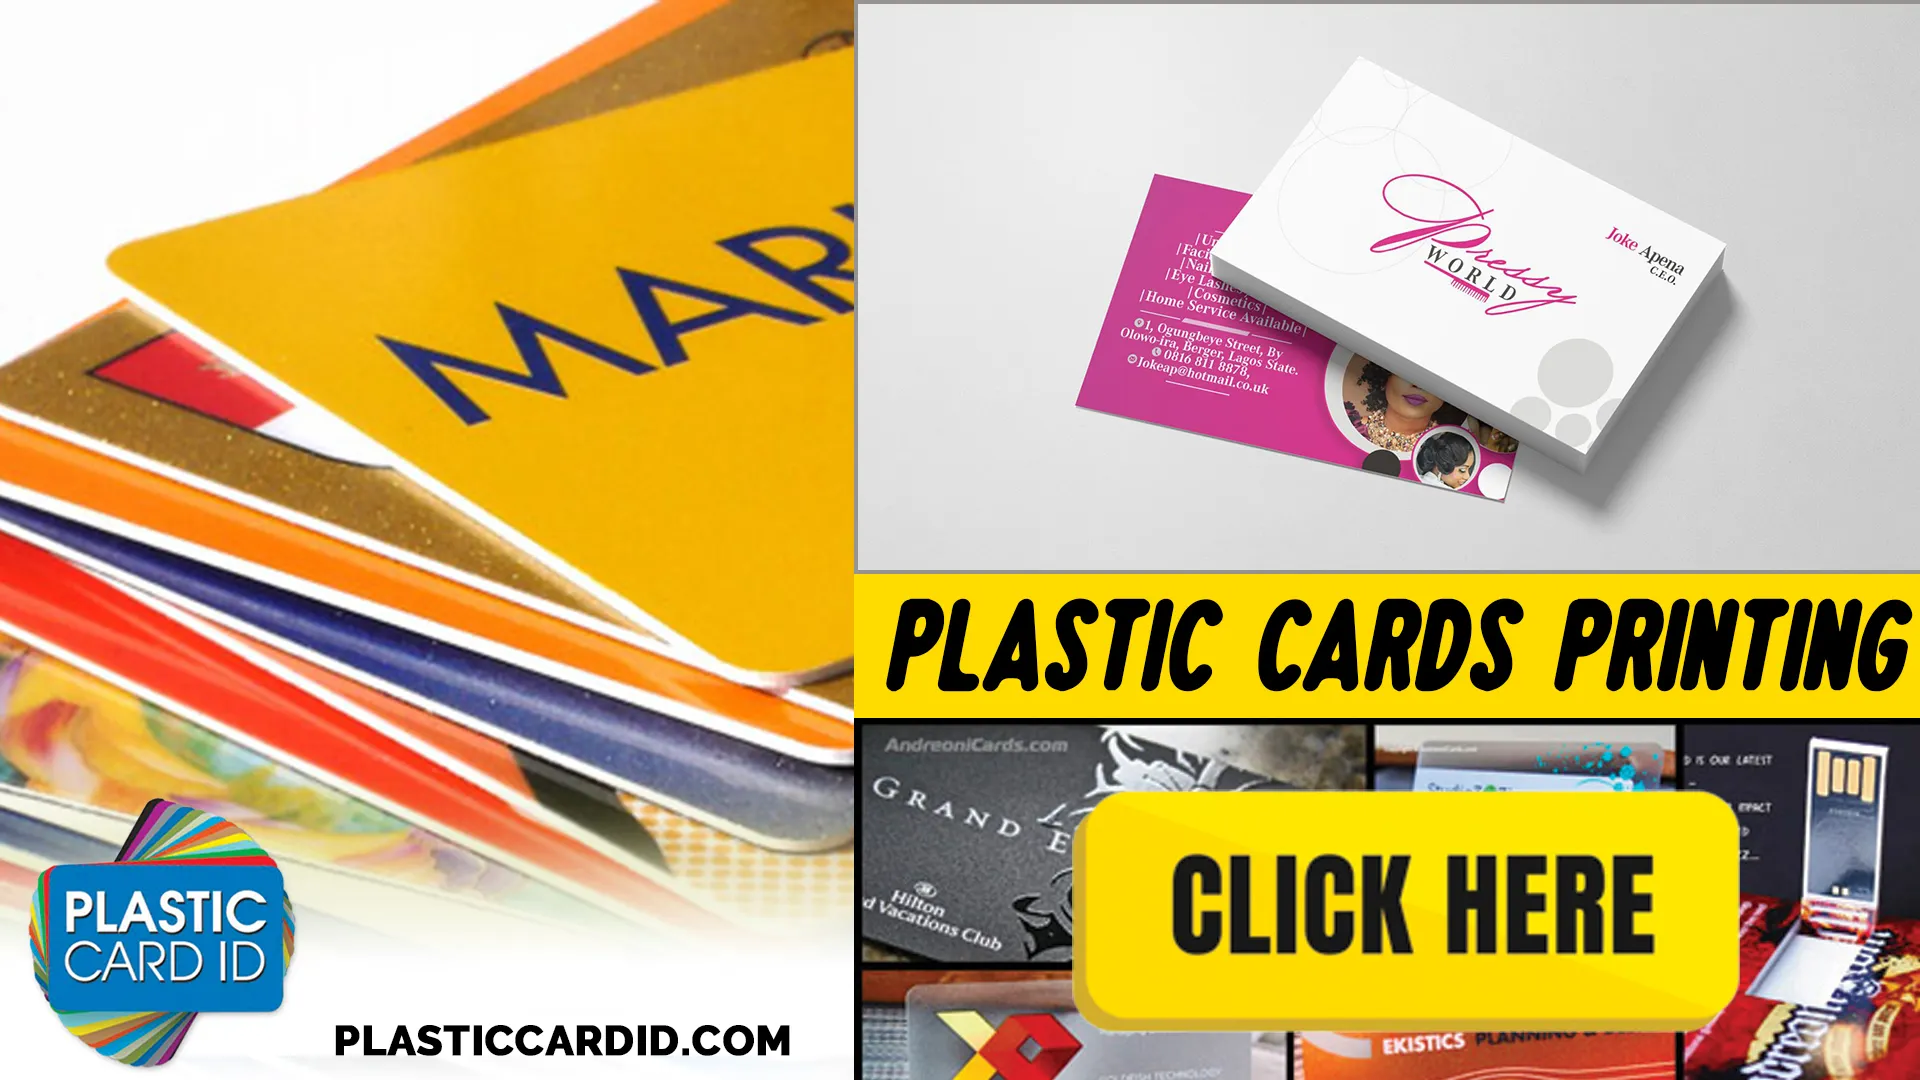 The Technology Behind Our Plastic Card Printing